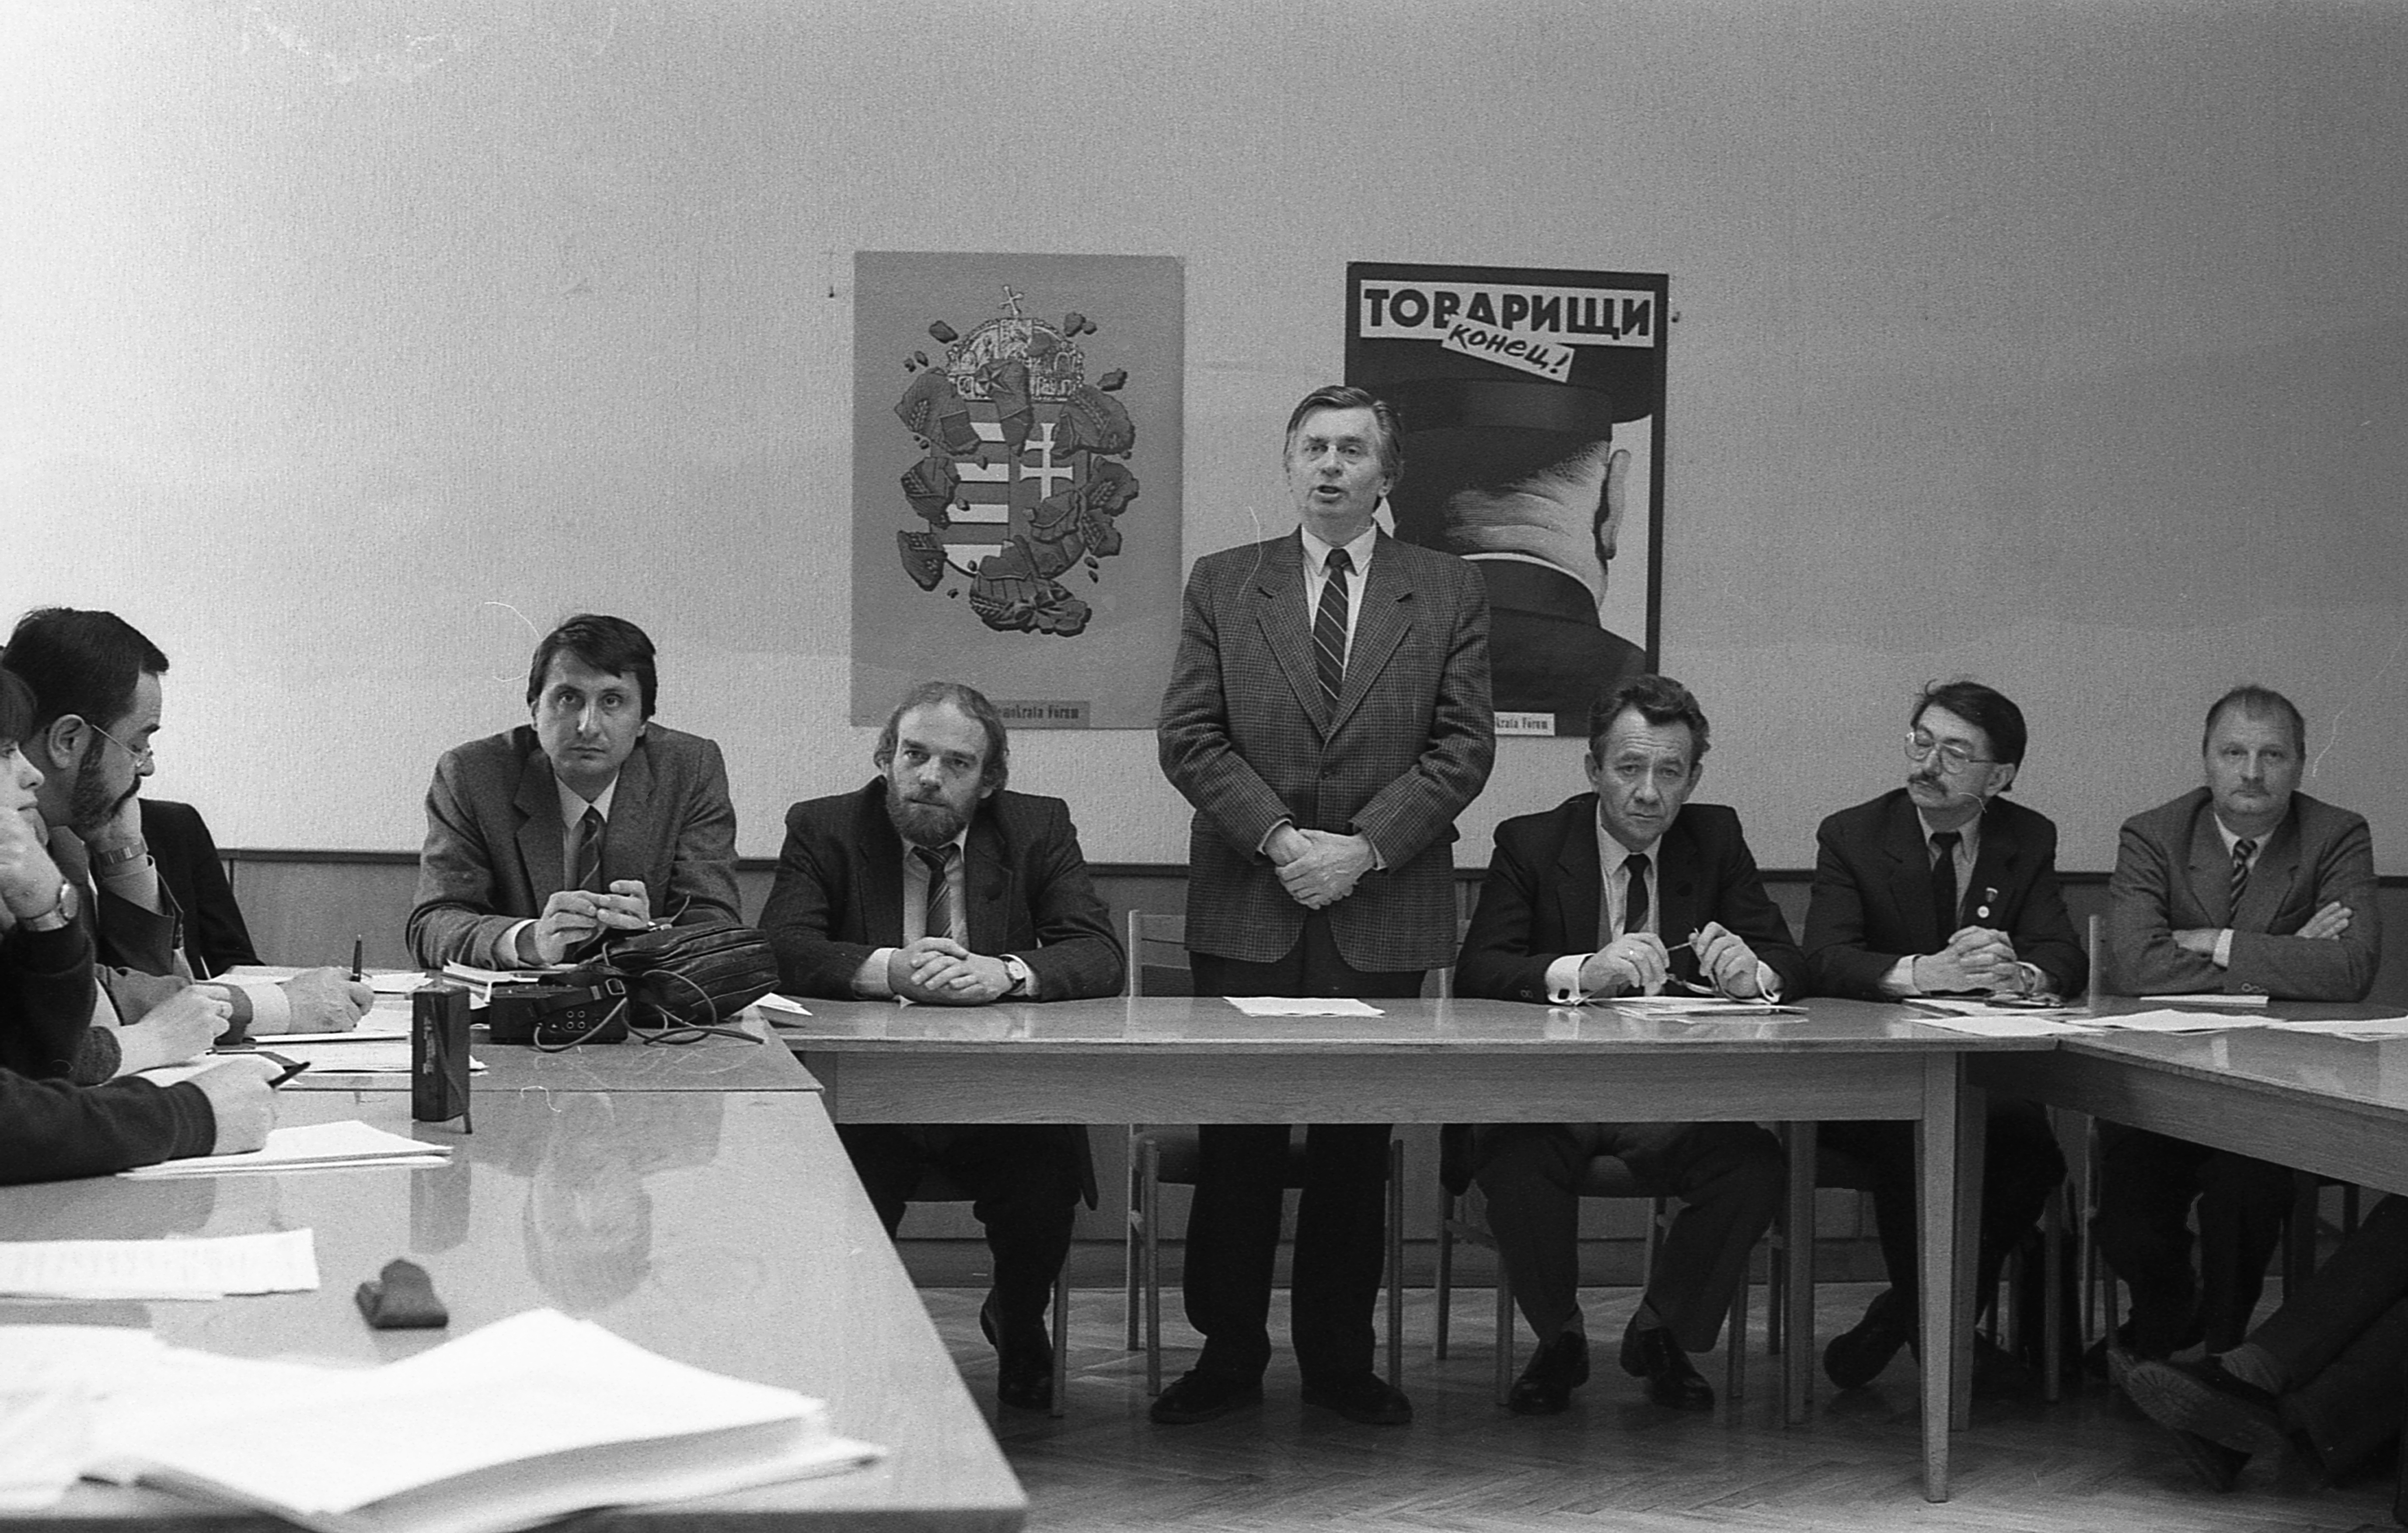 József Antall speaks in the headquarter of the Hungarian Democratic Forum, 1990.